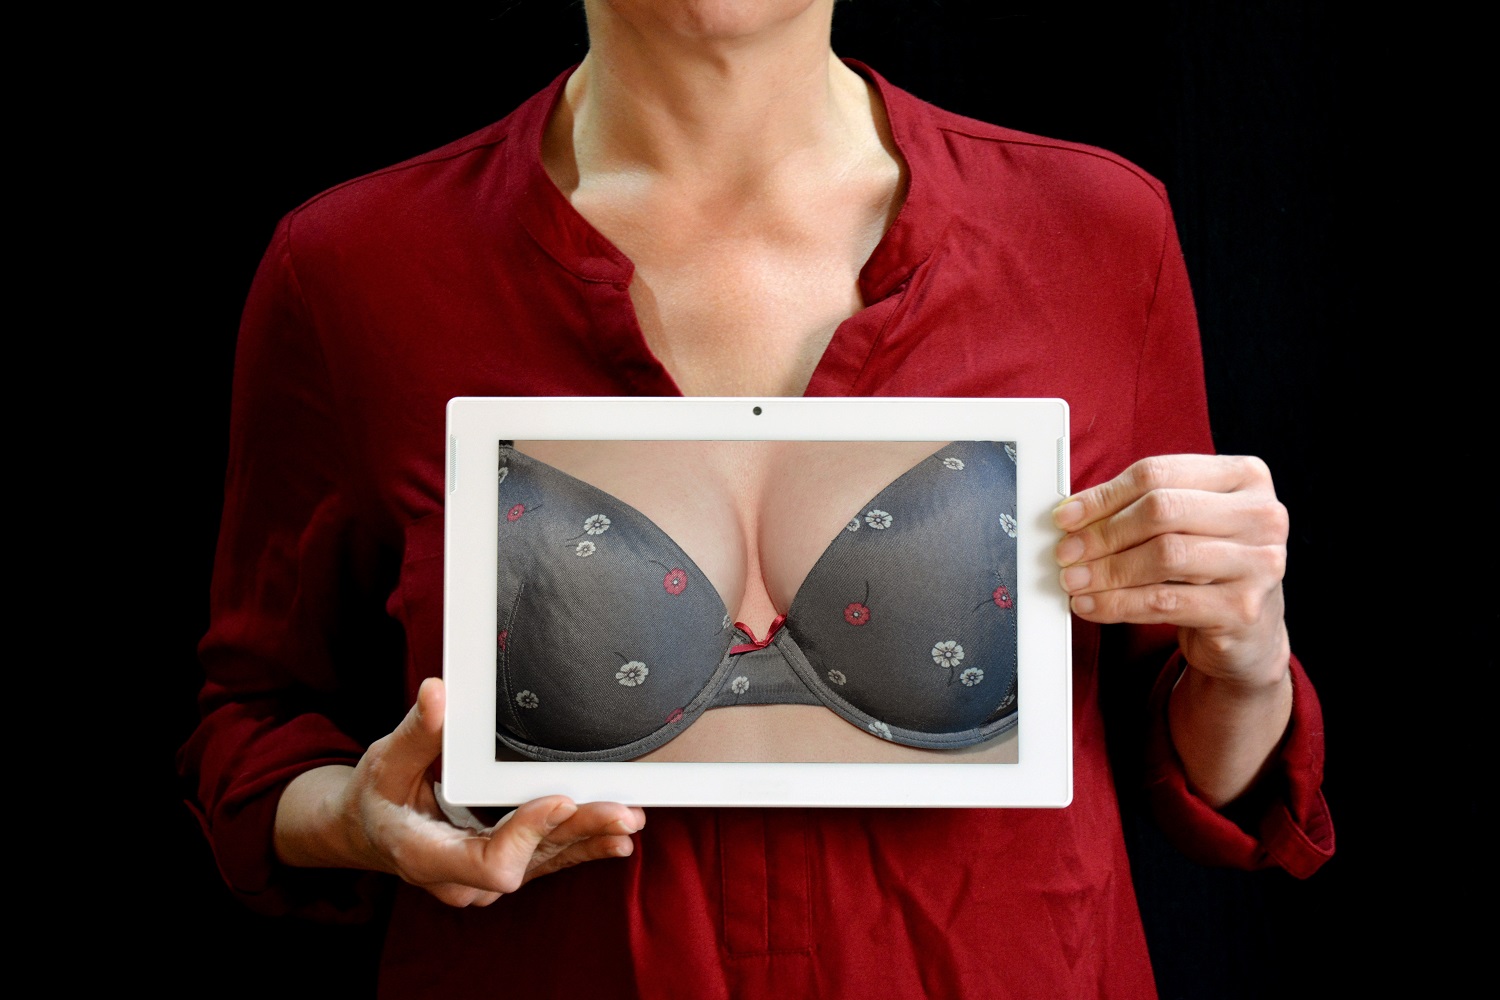 woman holding up photo of breasts